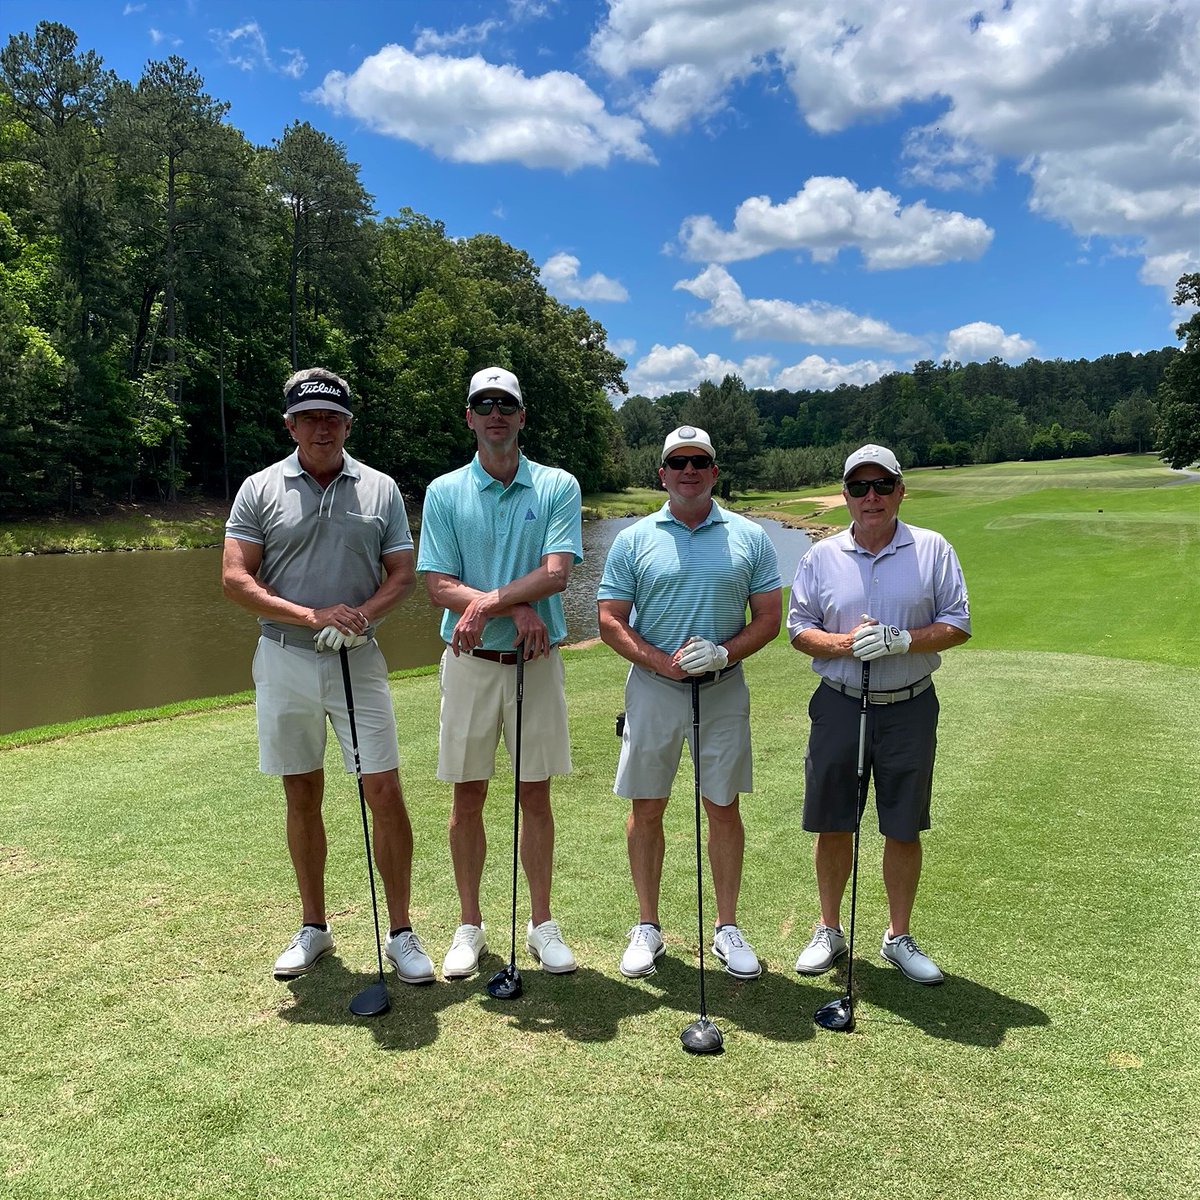 Last week, Robert Jones and Paul Fleming of @bankersins had a great time participating in the Keith Crisco Memorial Golf Tournament! The event, which we co-sponsored with @Travelers, supports the @Pfeiffer1885 Falcon Club. 🏌🏼‍♂️ #BankersInsurance #PfeifferUniversity #GoFalcons